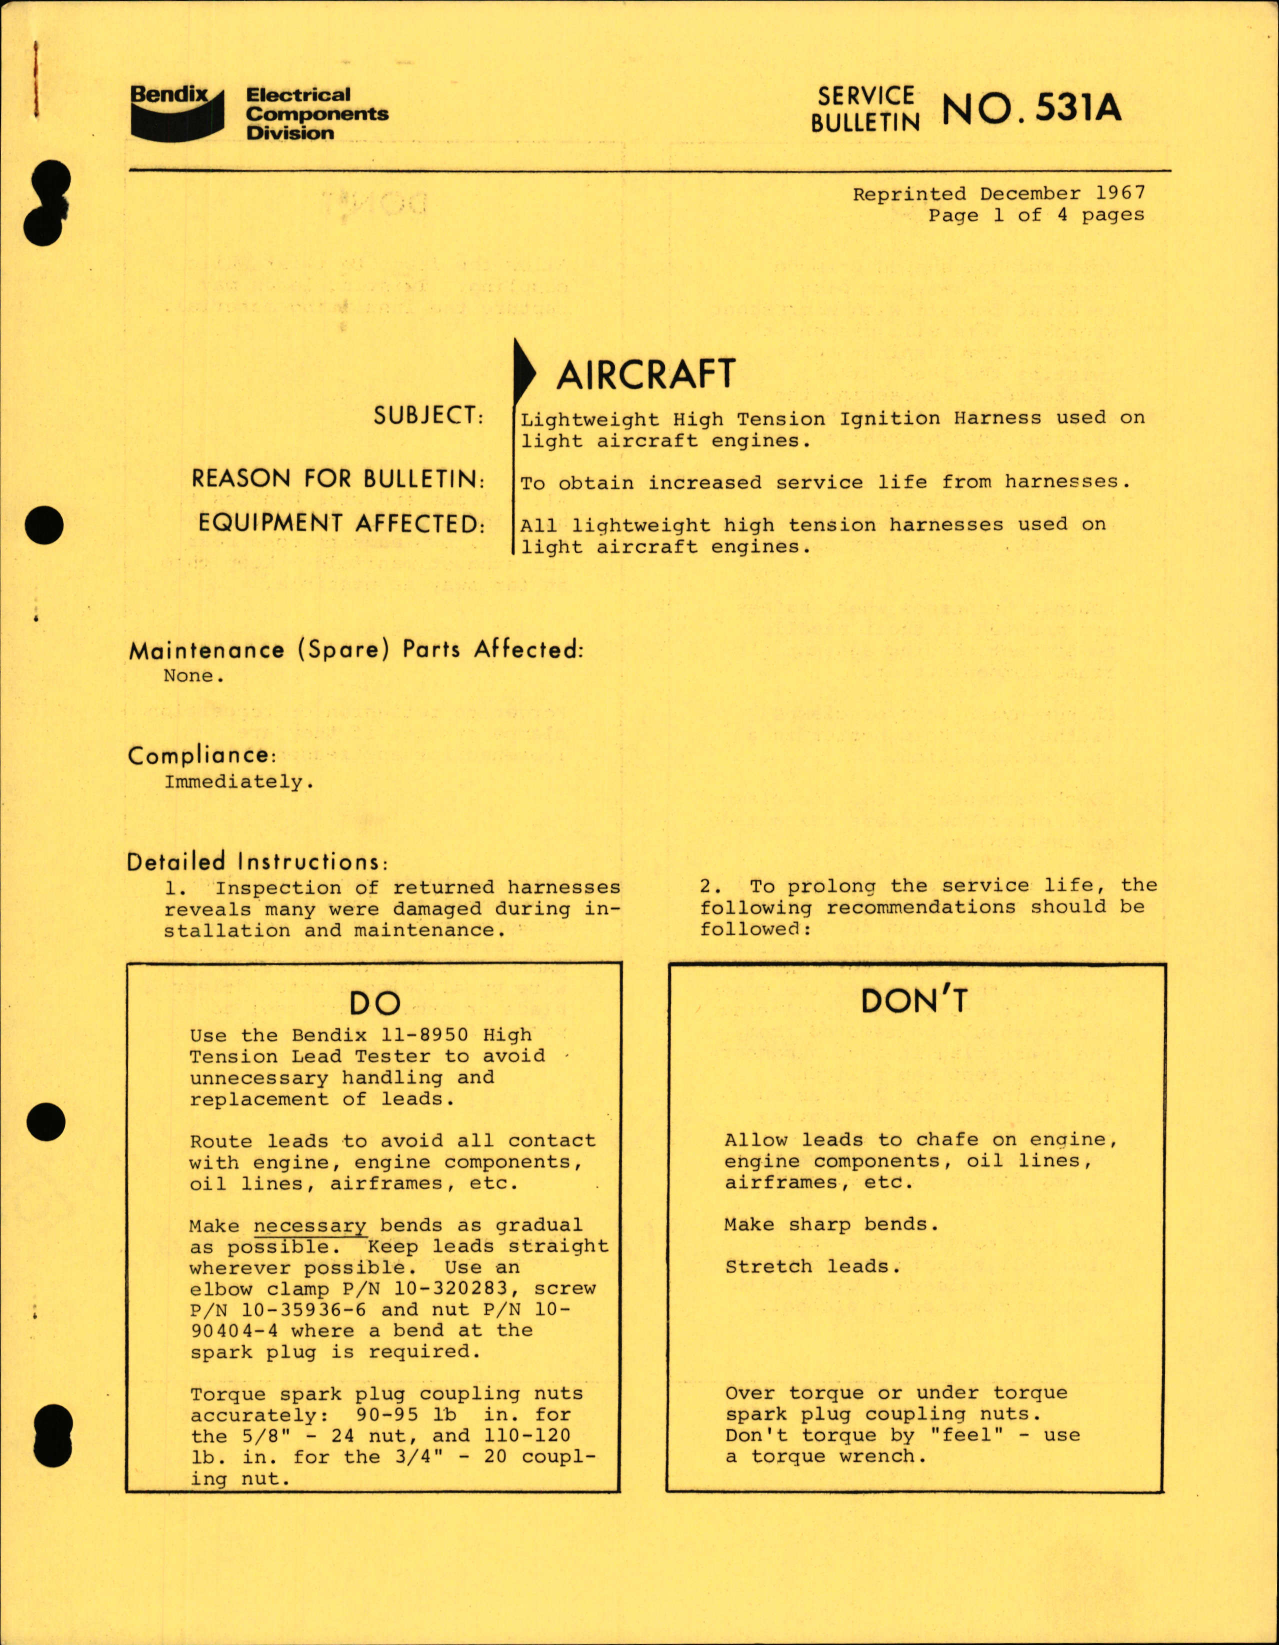 Sample page 1 from AirCorps Library document: Lightweight High Tension Ignition Harness used on Light Aircraft Engines